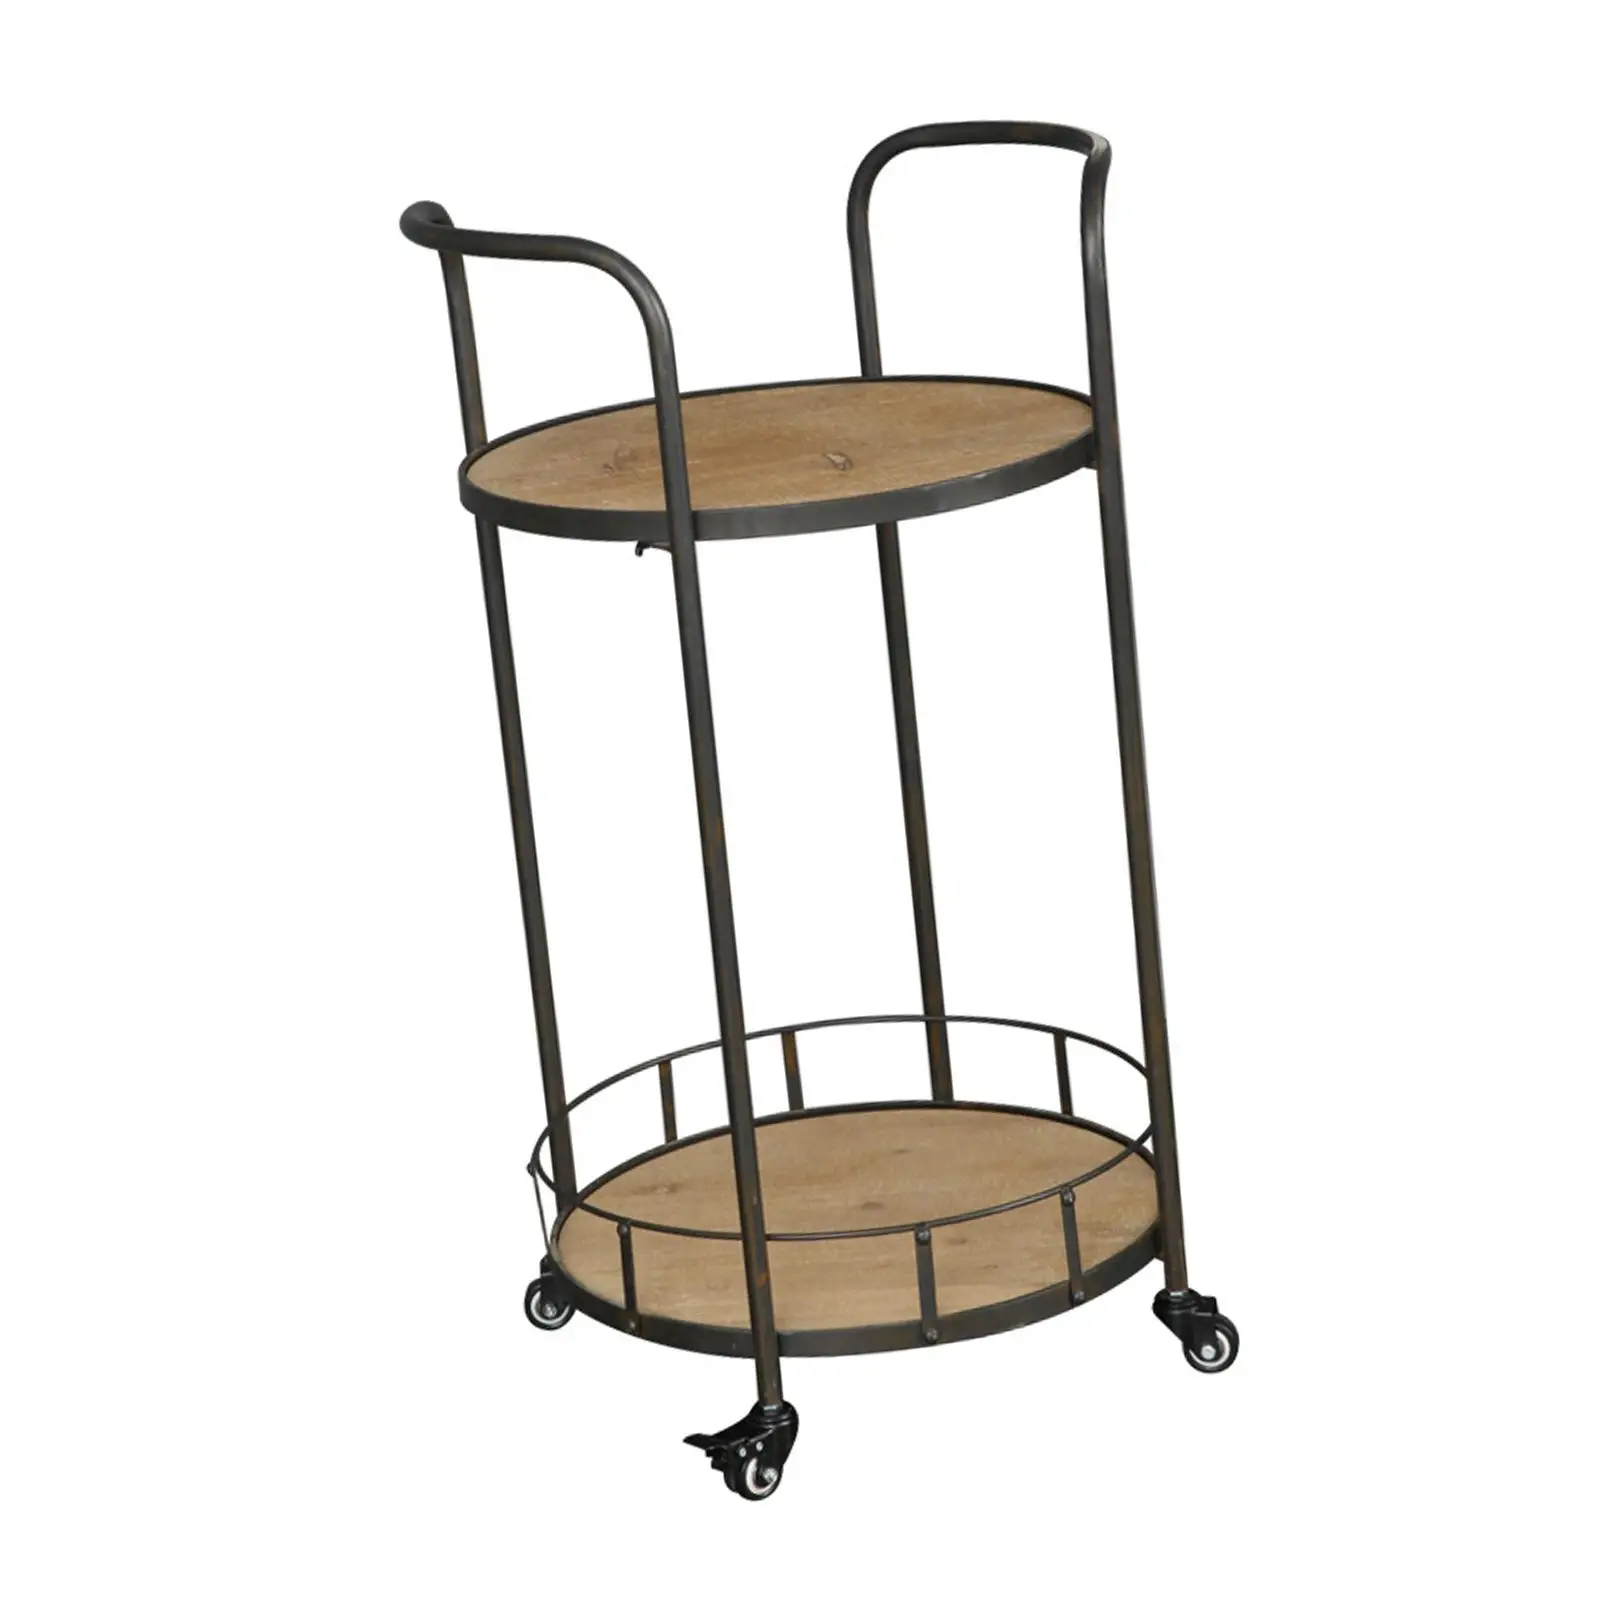 

2 Layer Wooden Rack with Lockable Wheels Multi Purpose Storage Rack Trolley for Kitchen Bathroom Laundryroom Home